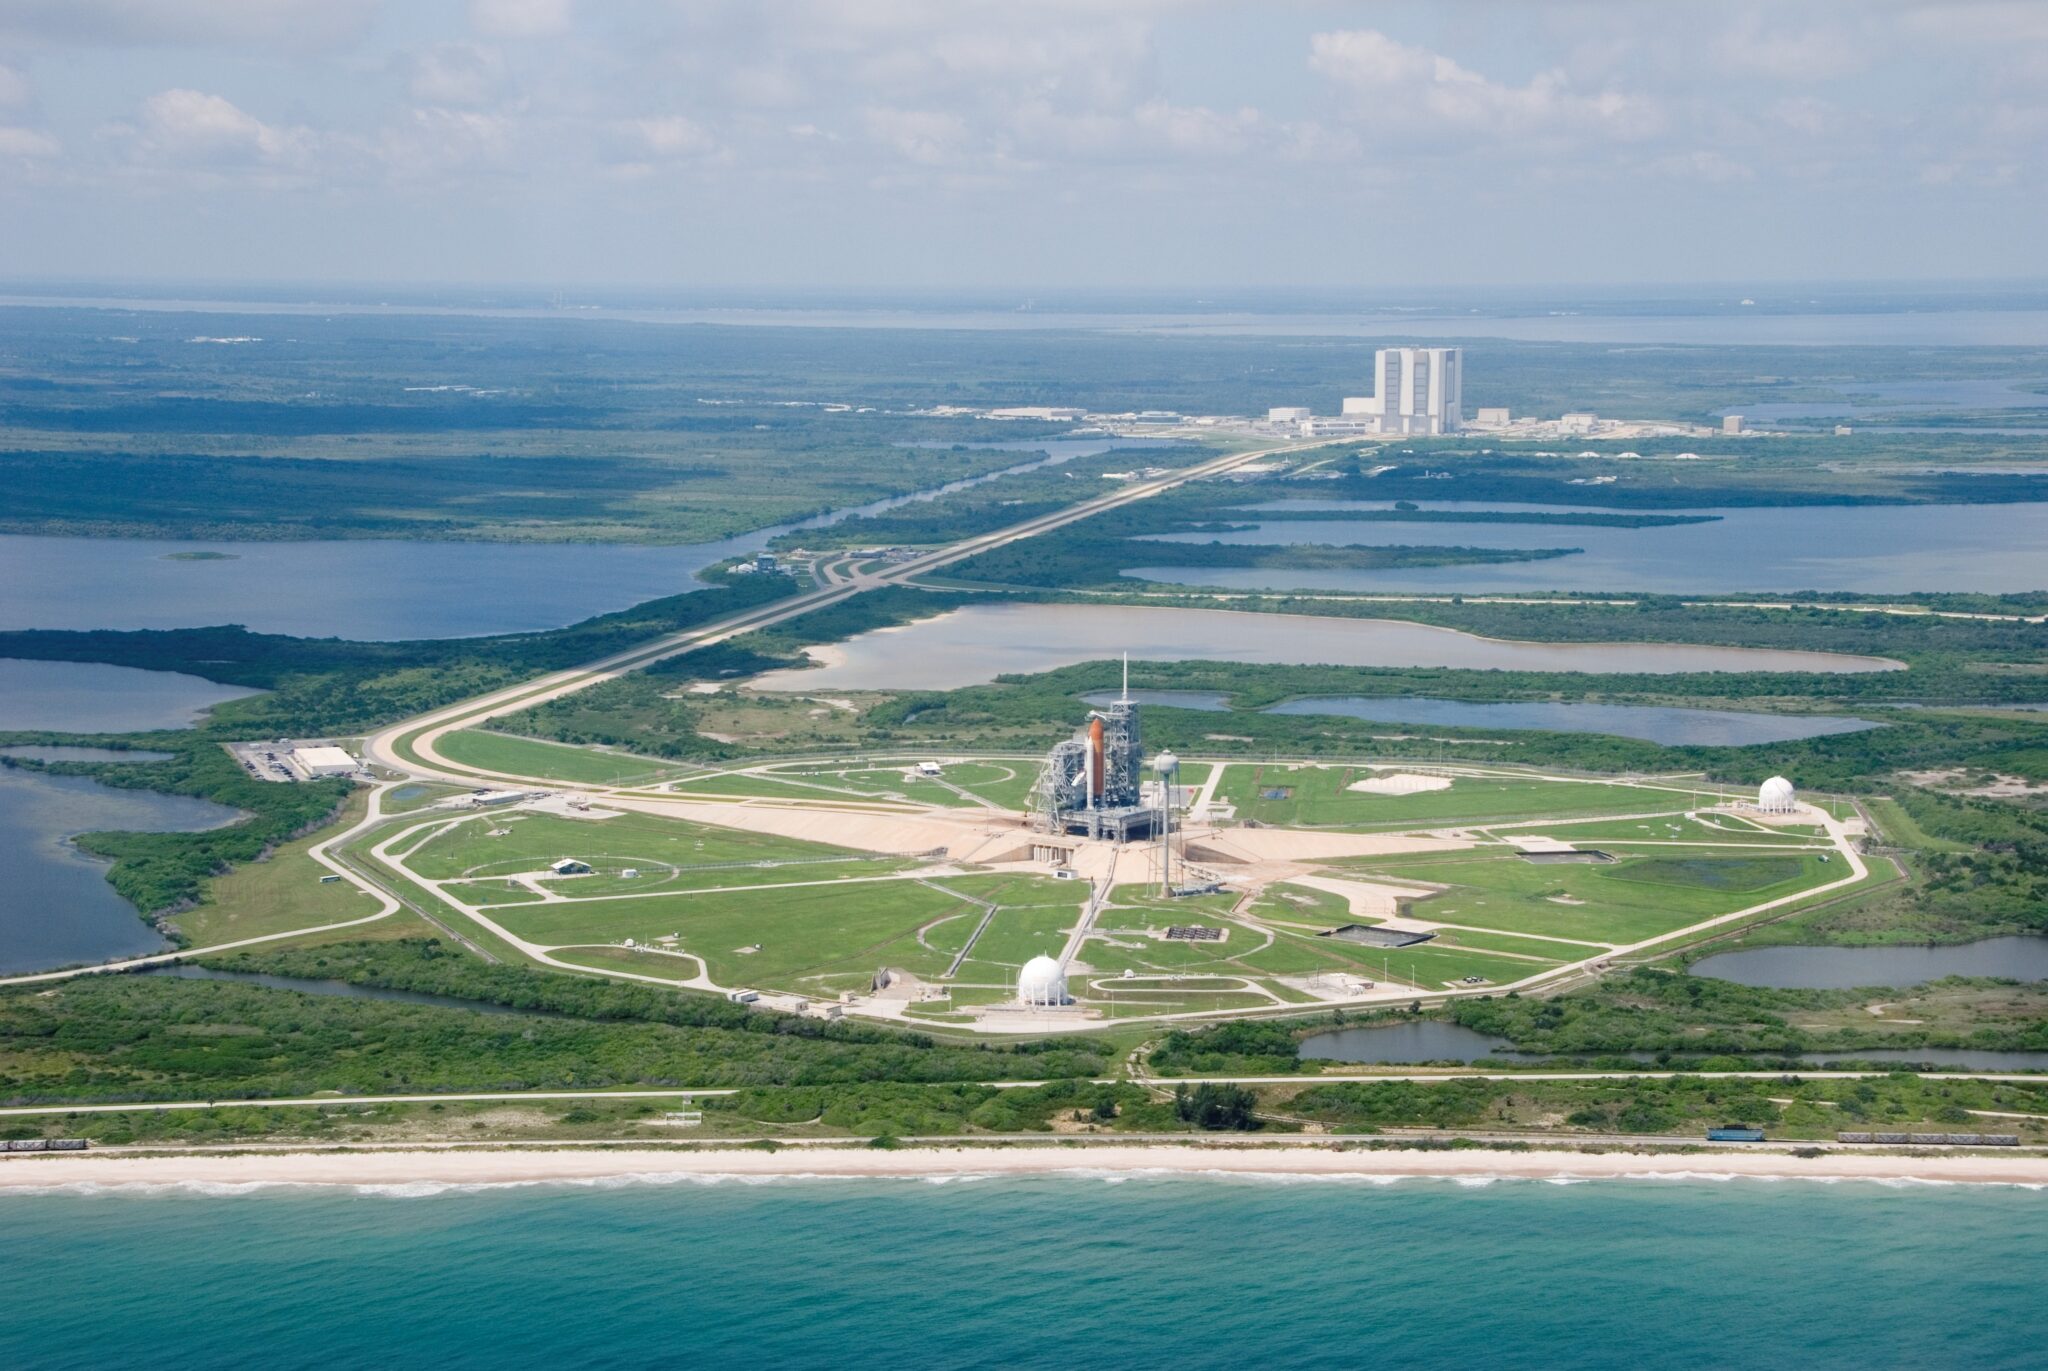 Cape Canaveral in Florida.